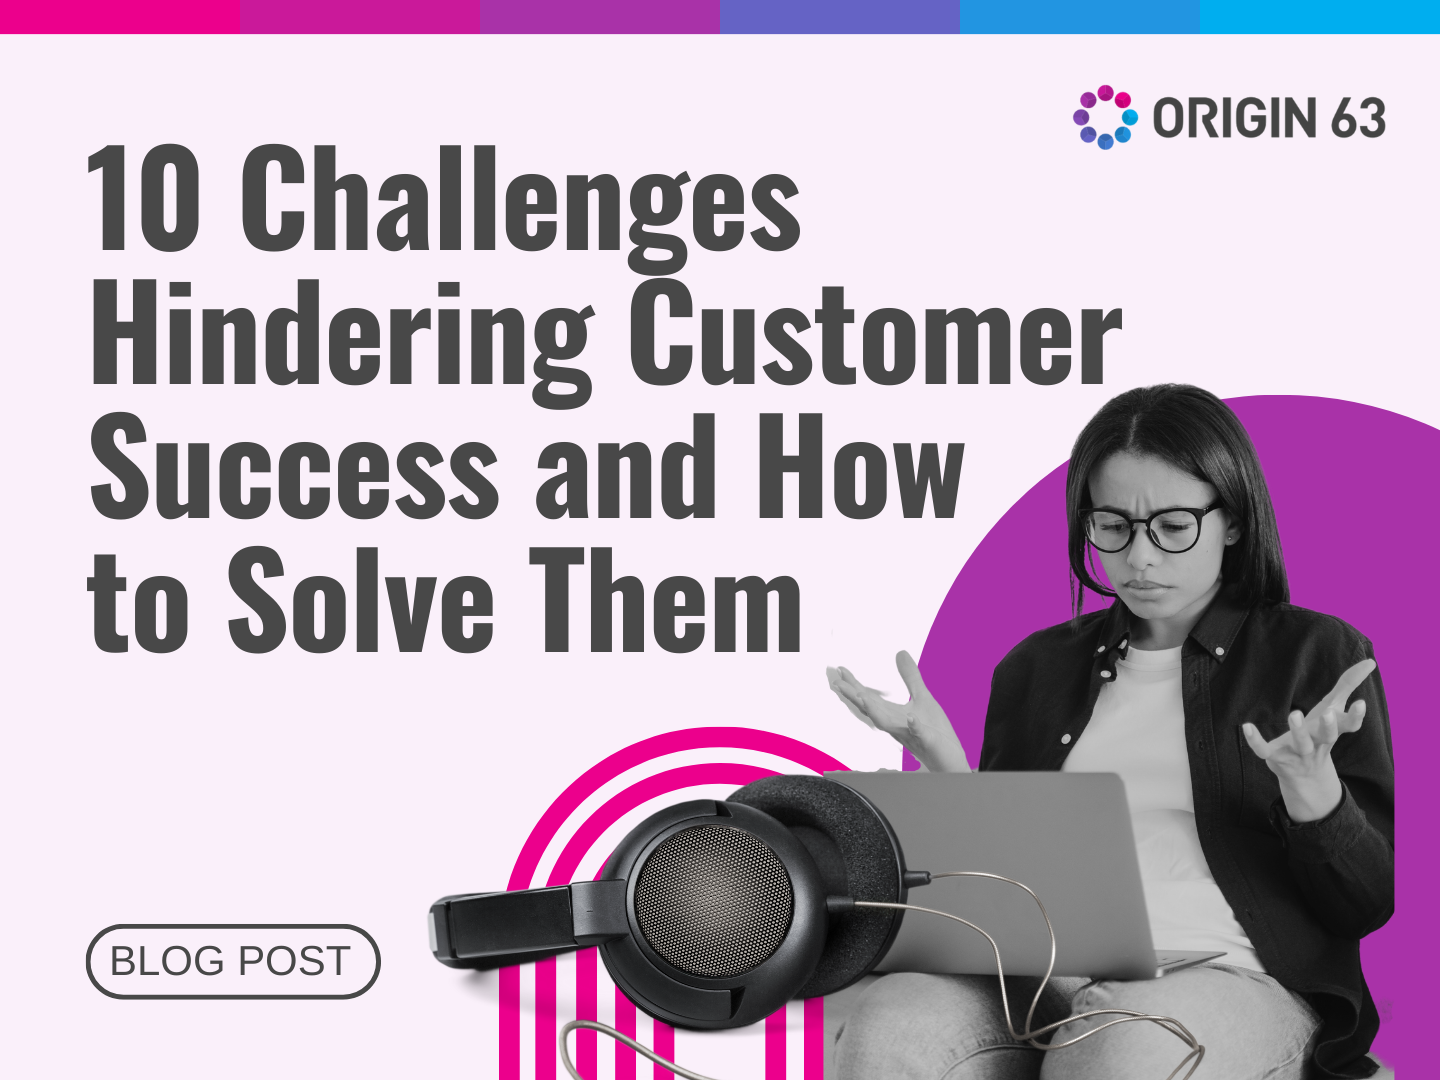 10 Challenges Hindering Customer Success and How to Solve Them, No Process for Feedback